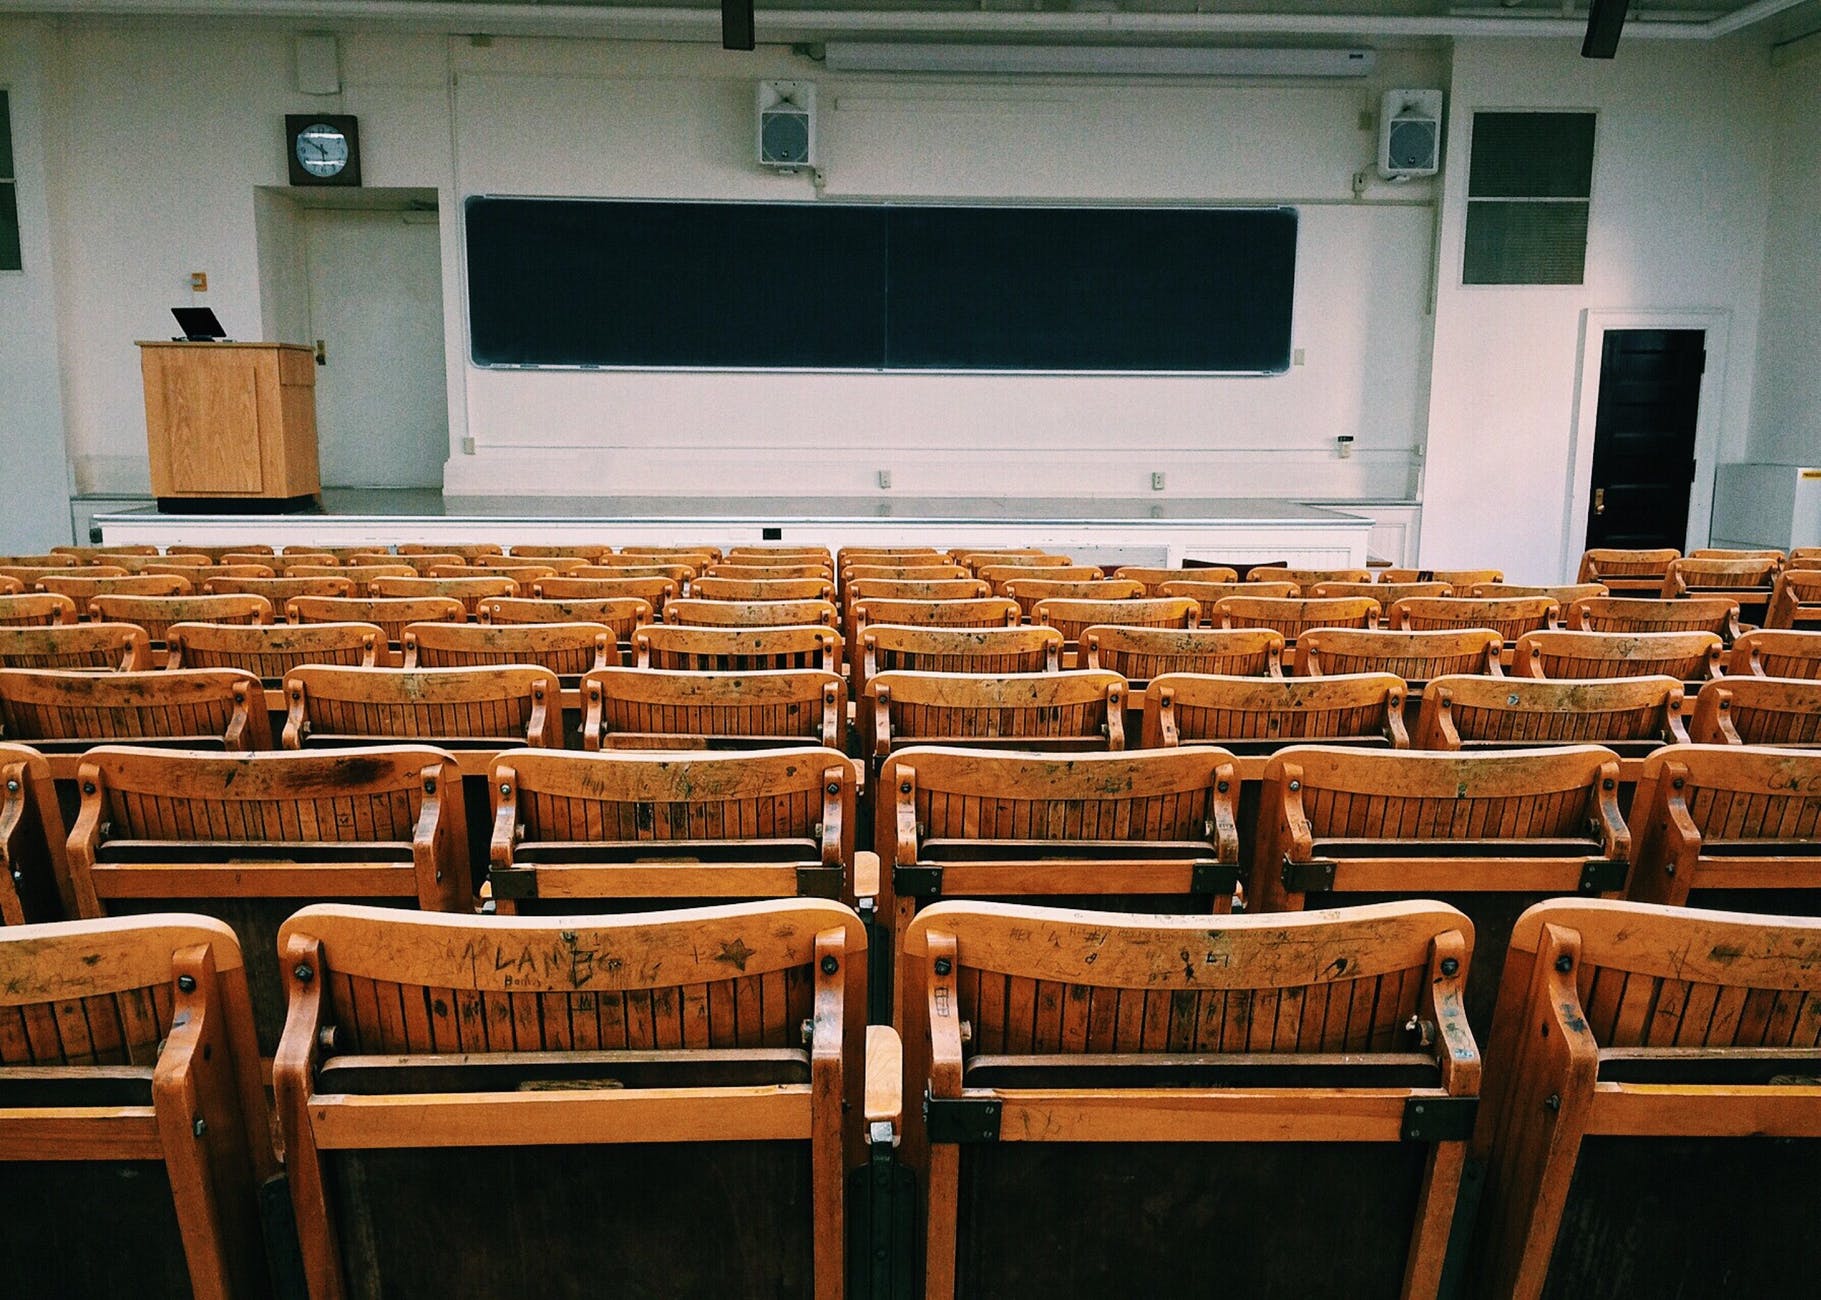 Brandon attended a lecture at another university. | Source: Pexels